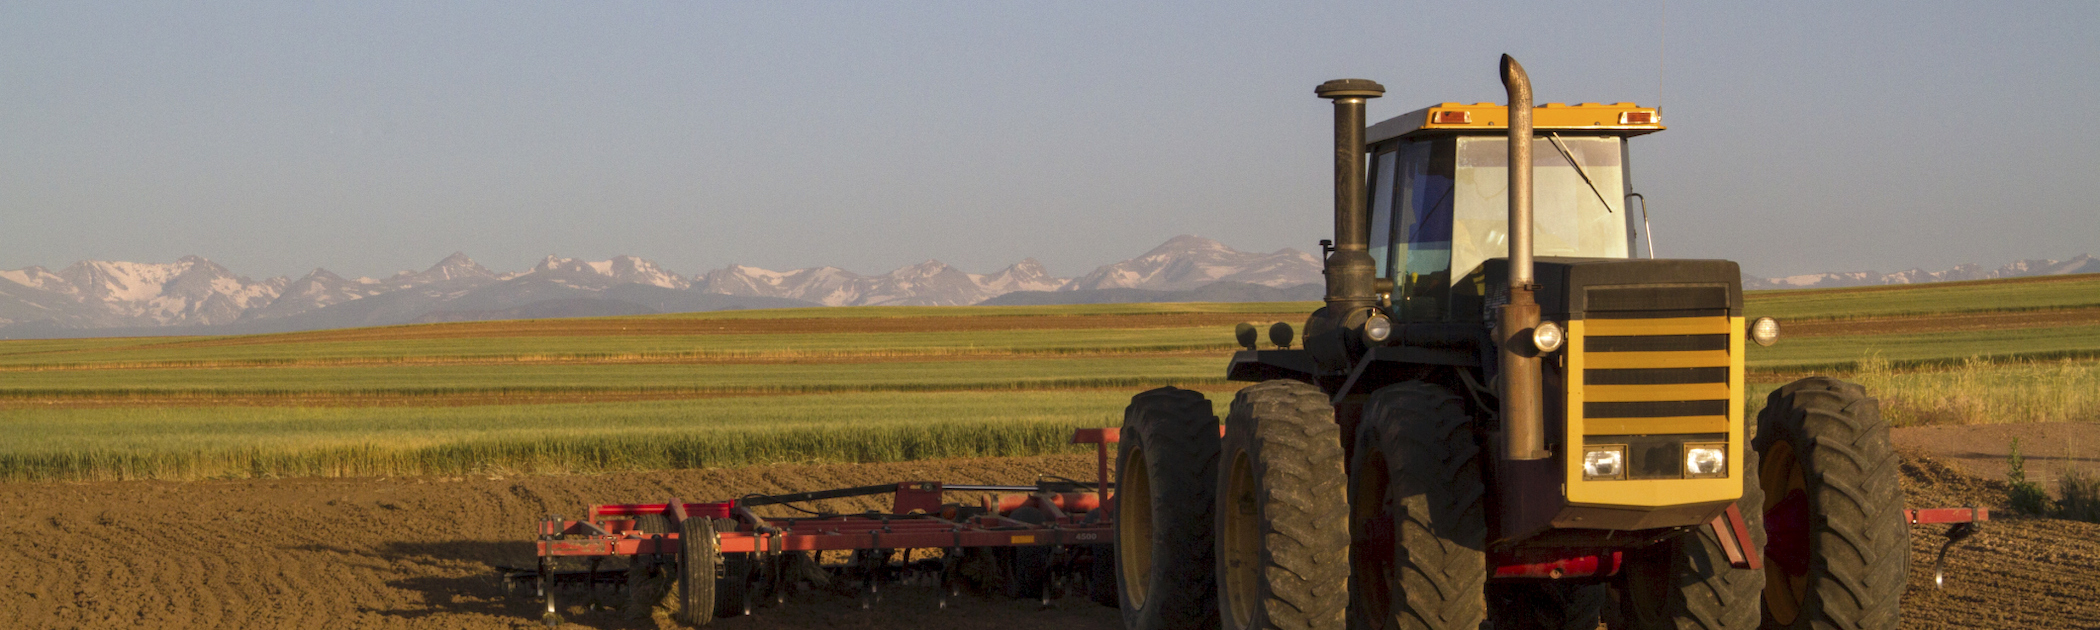 Fracking supports Colorado farmers